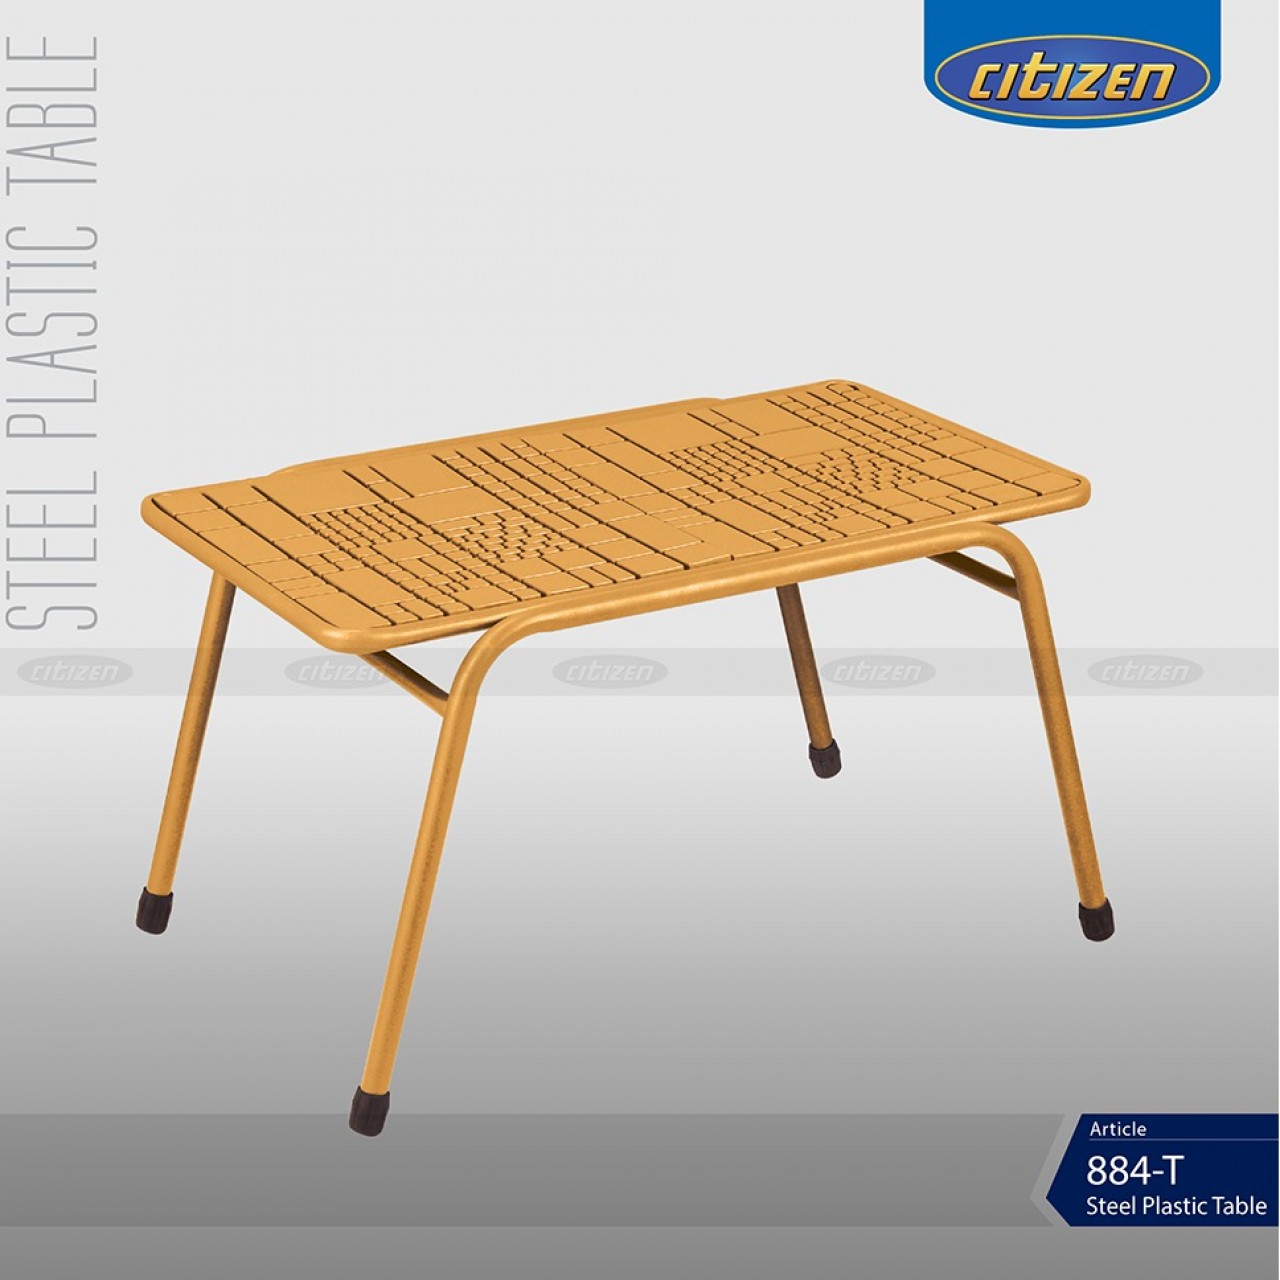 Citizen Steel Plastic Table 884-T For Home & Office